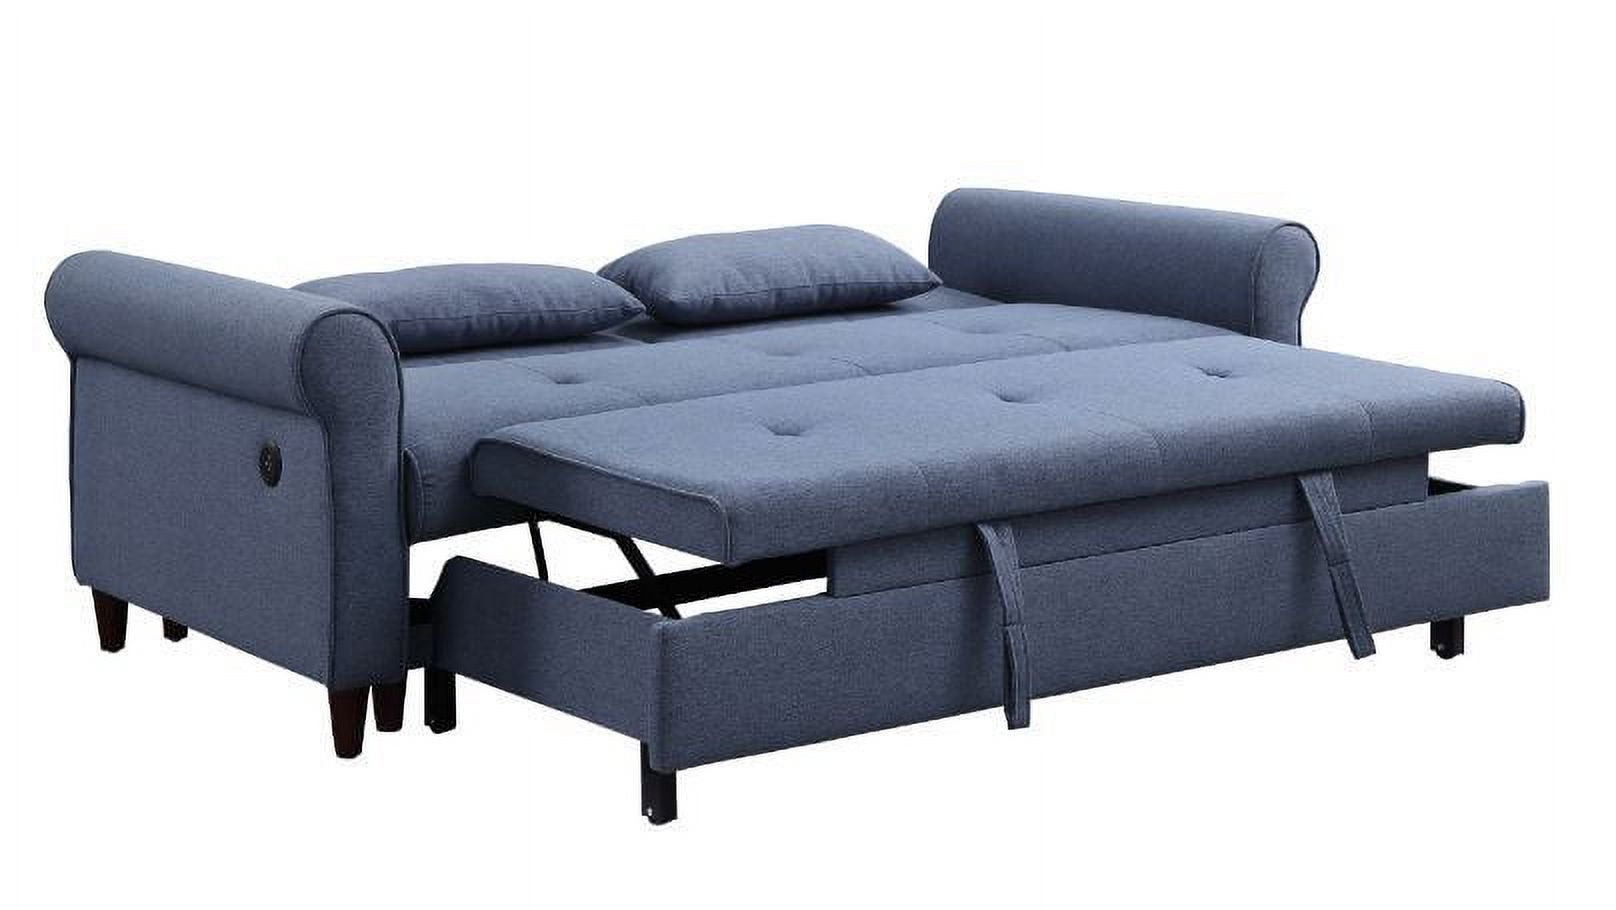 Blue Contemporary Living Room Furniture Pull-out Sleeper Sofa Built in USB Port - image 3 of 3